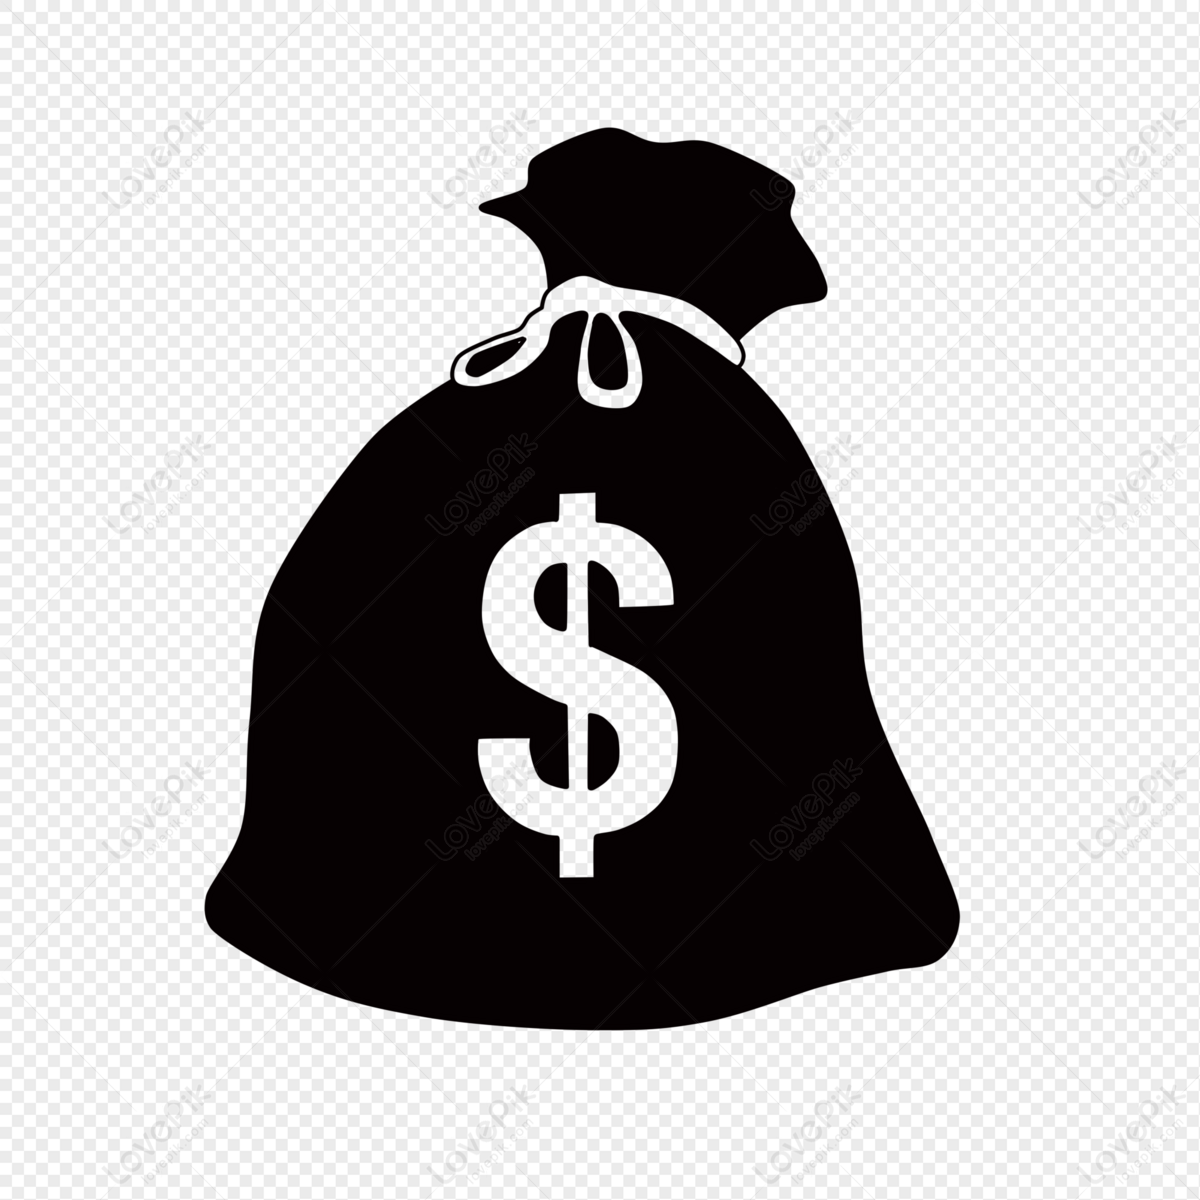 What the Money Bag Concept Means for your Business